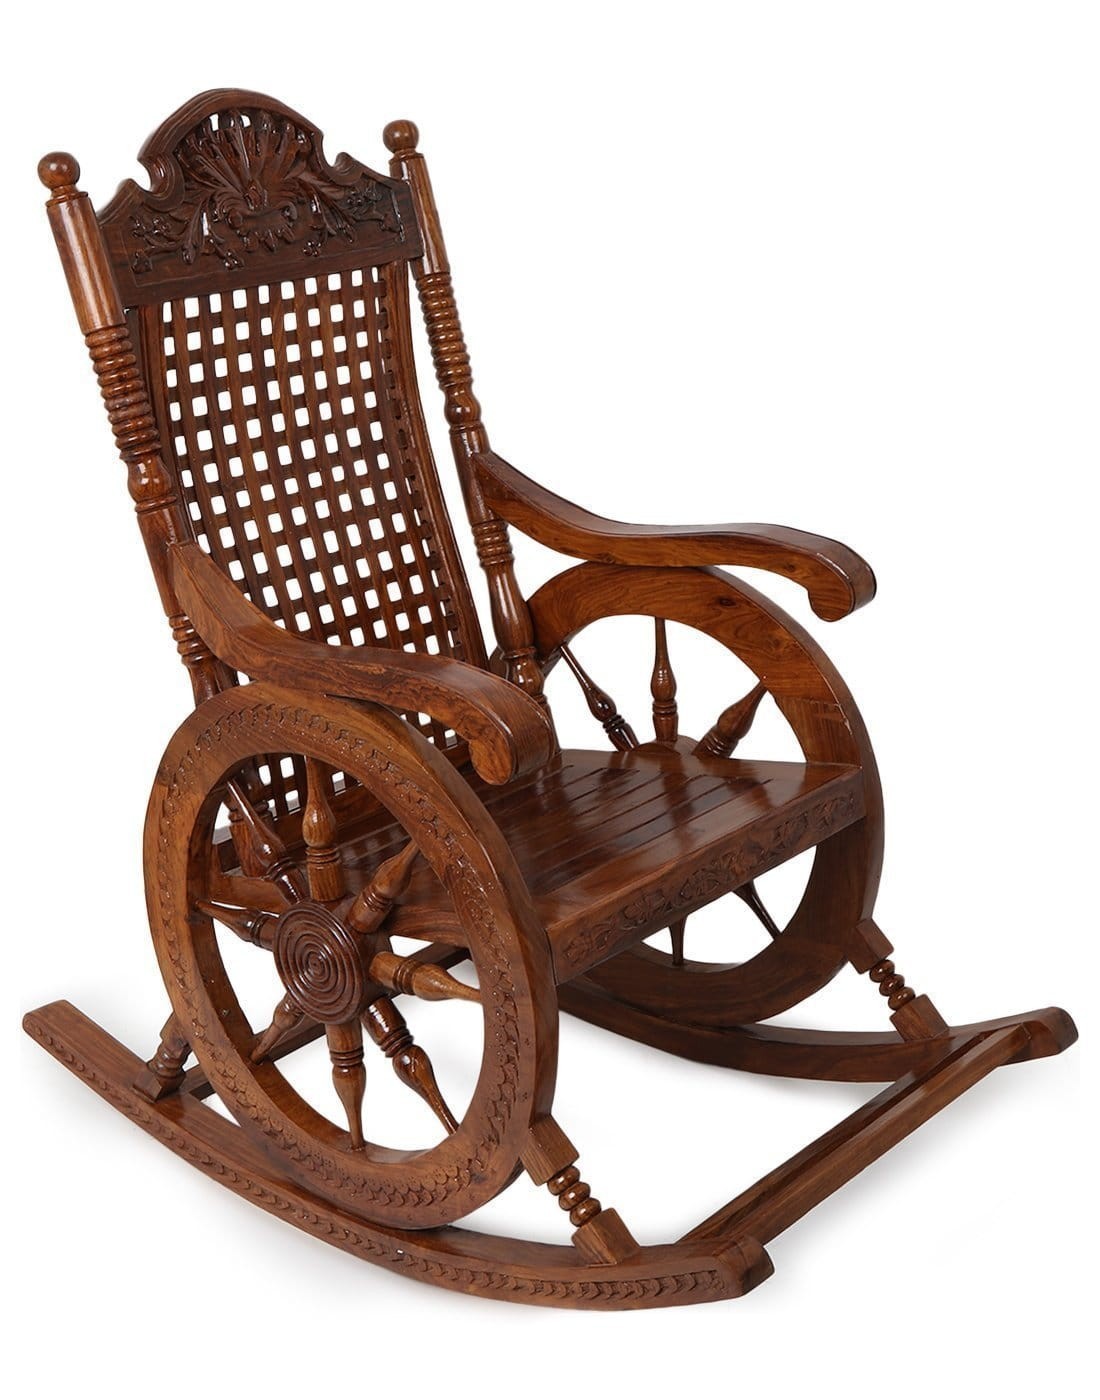 Handcared Rocking Chair